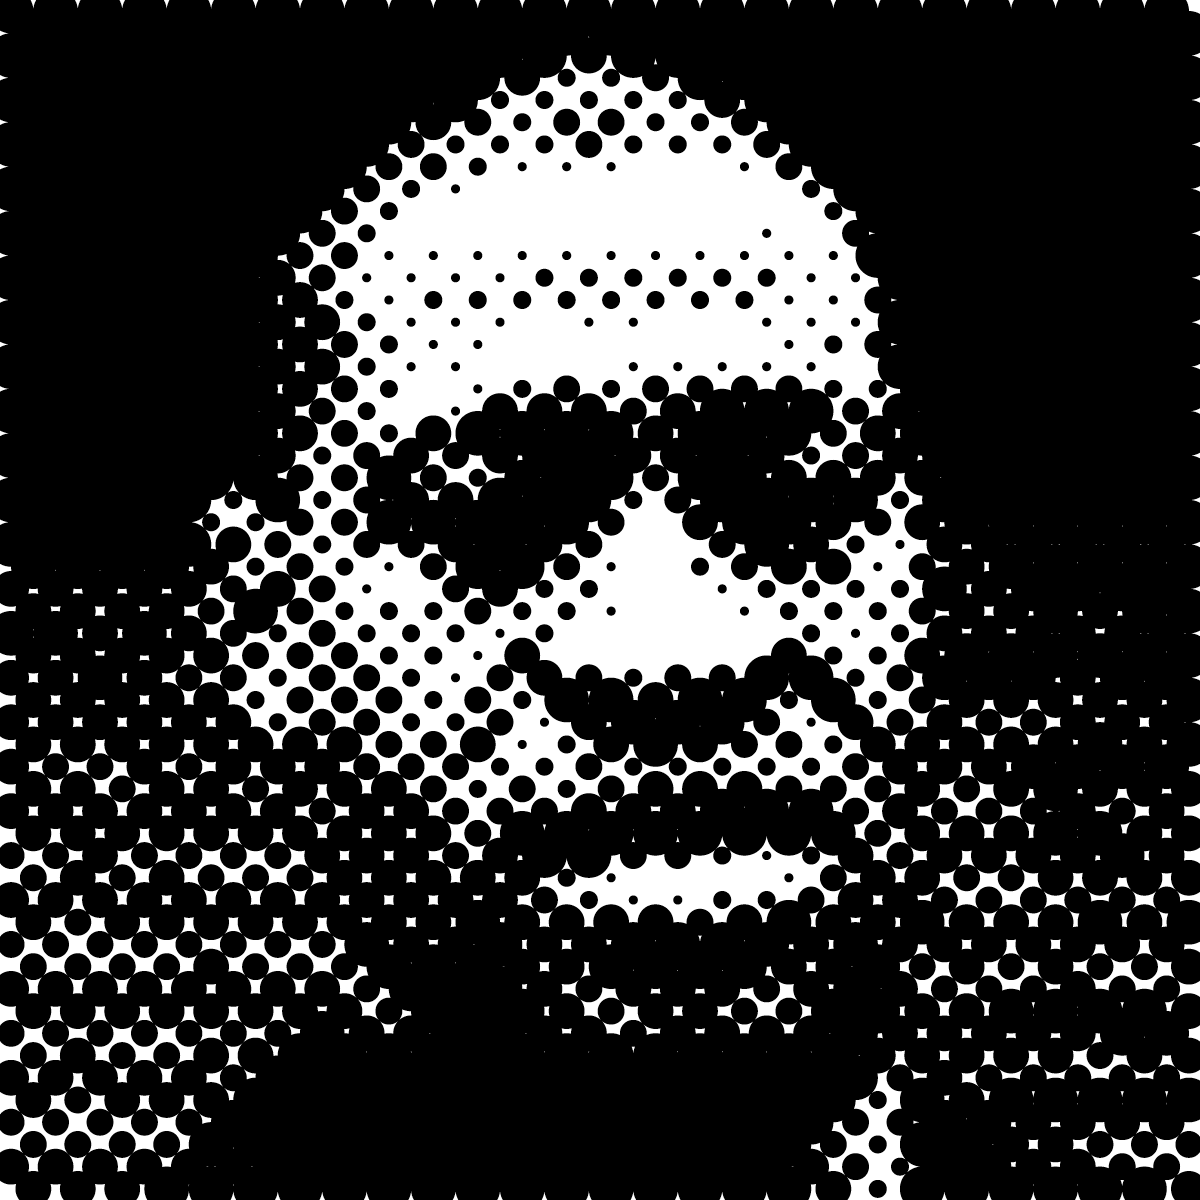 A halftone image of George Floyd, a Black man, in front of a brick wall. The halftone dots reduce the image’s clarity, making it more graphic than photographic.